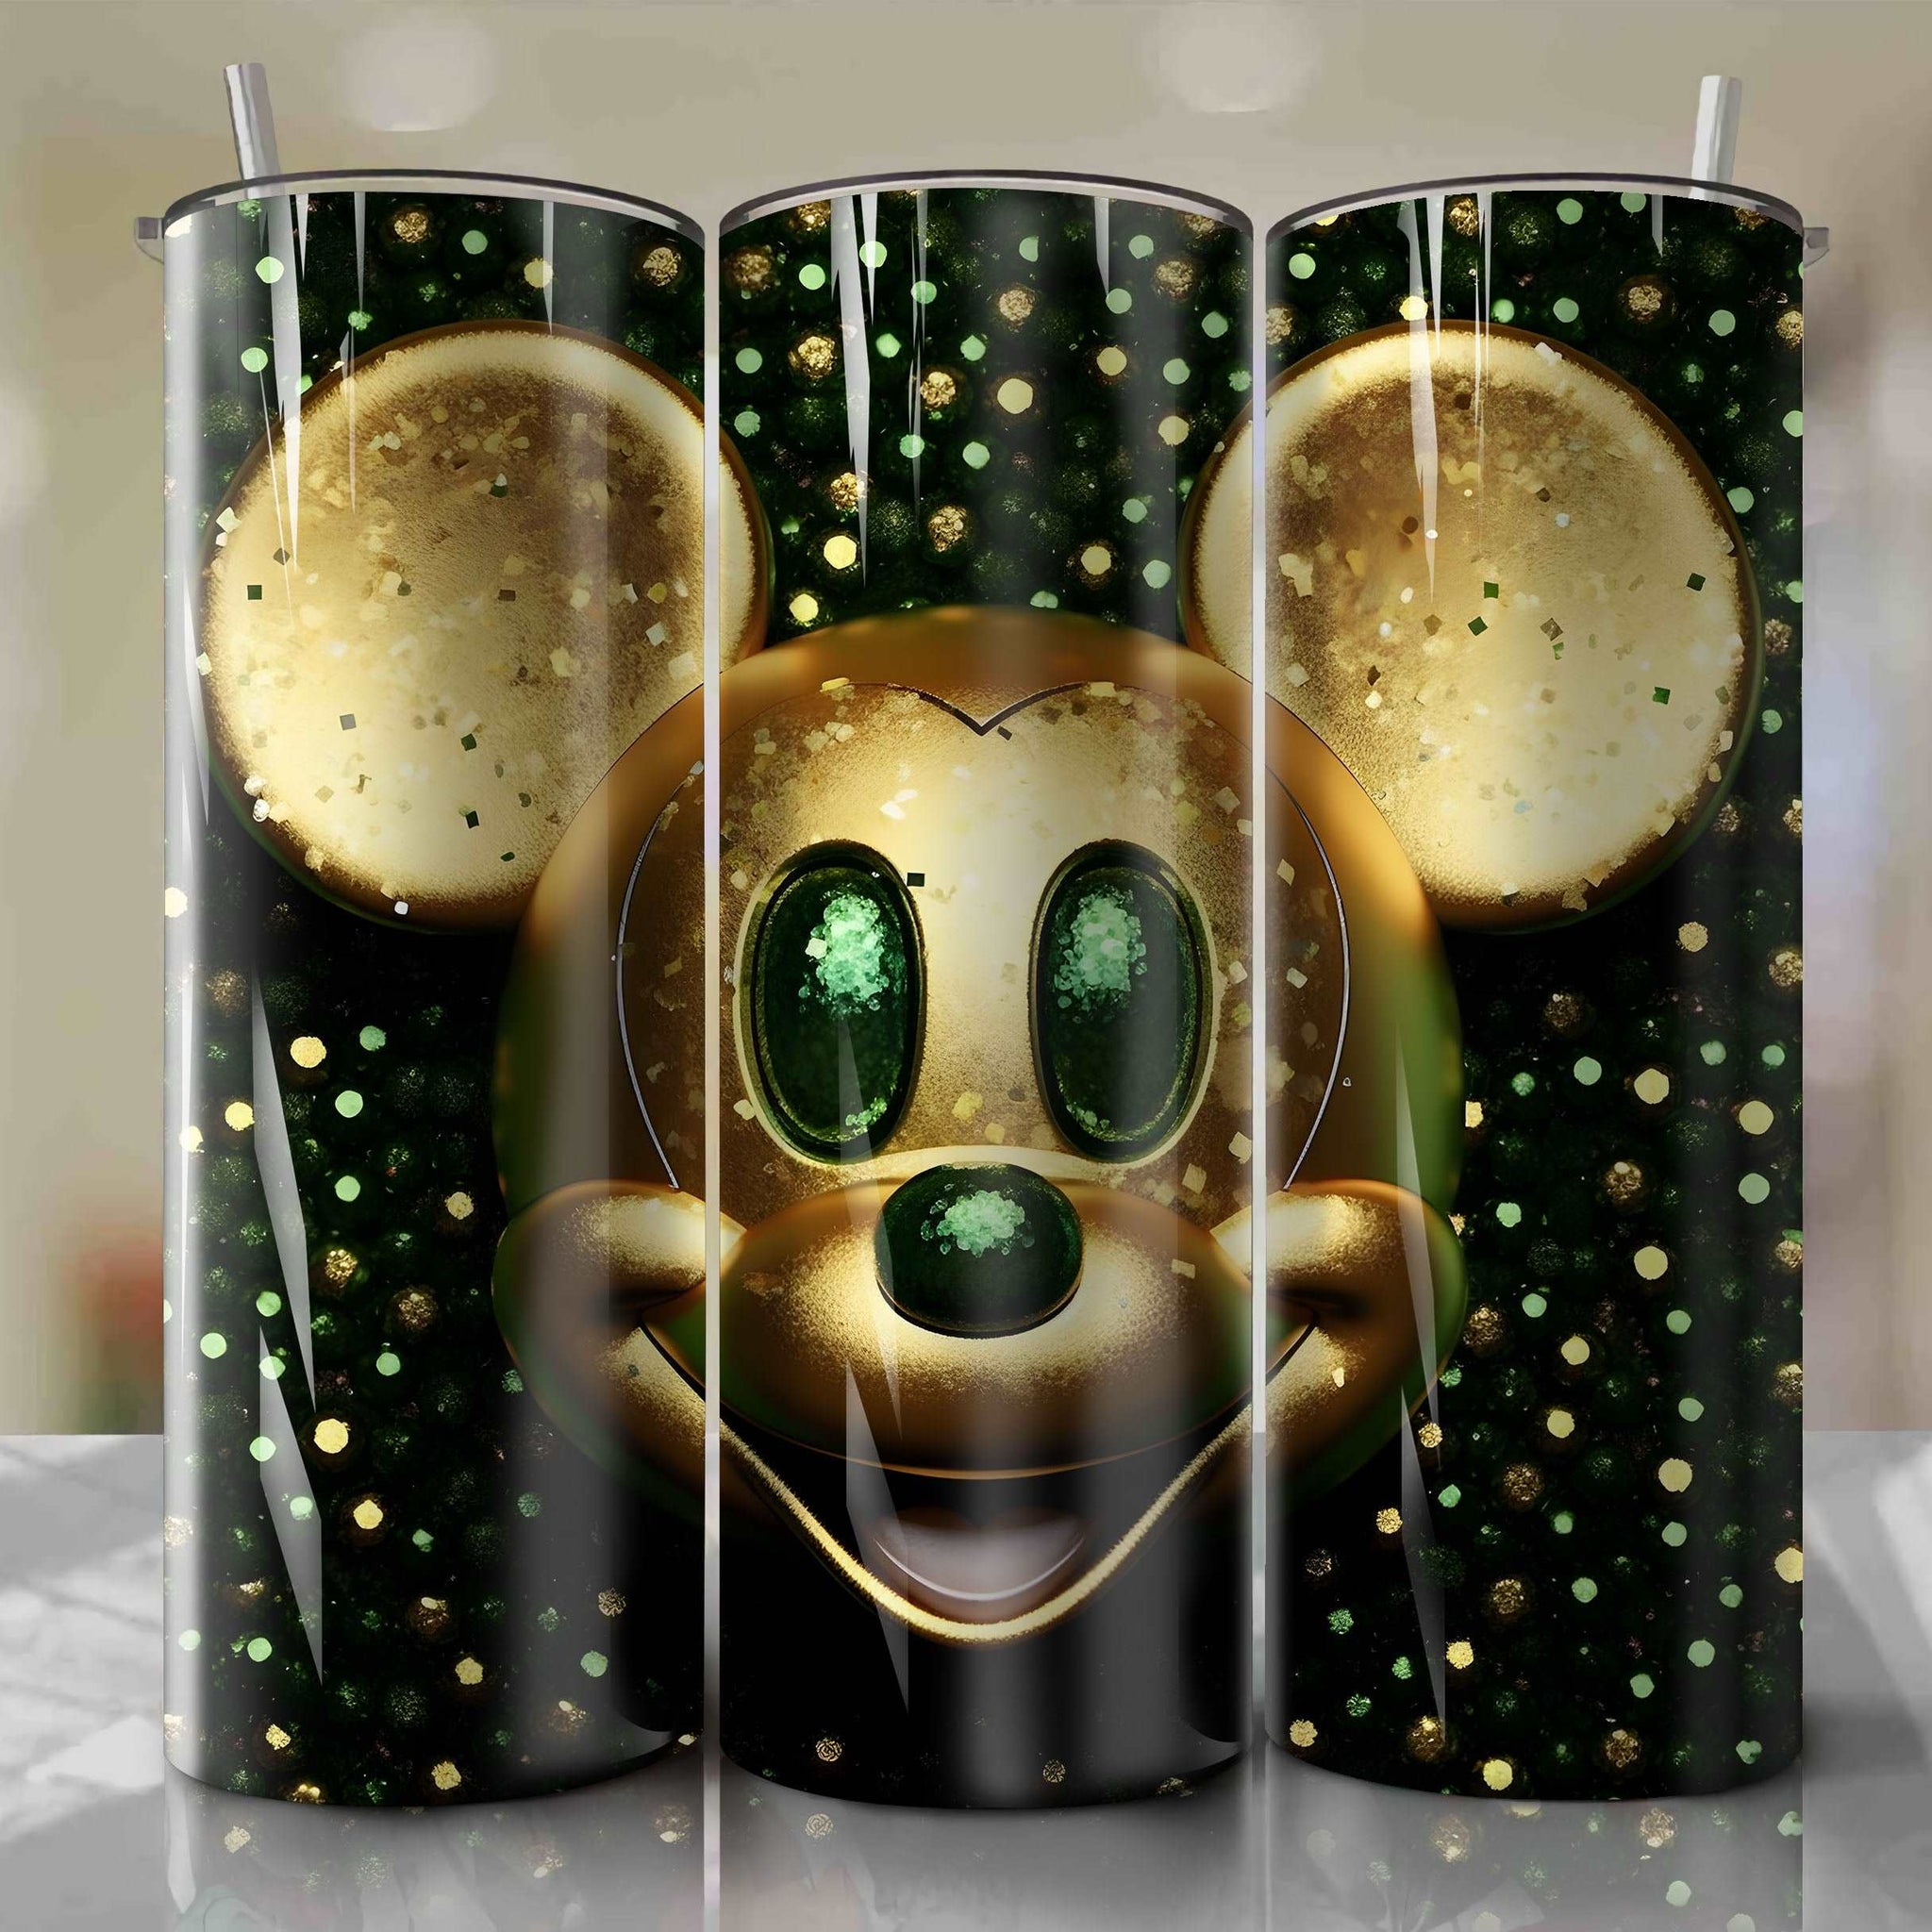 Abstract 3D Bling Mickey Mouse Face Graphic - Digital Download for Sublimation Printing